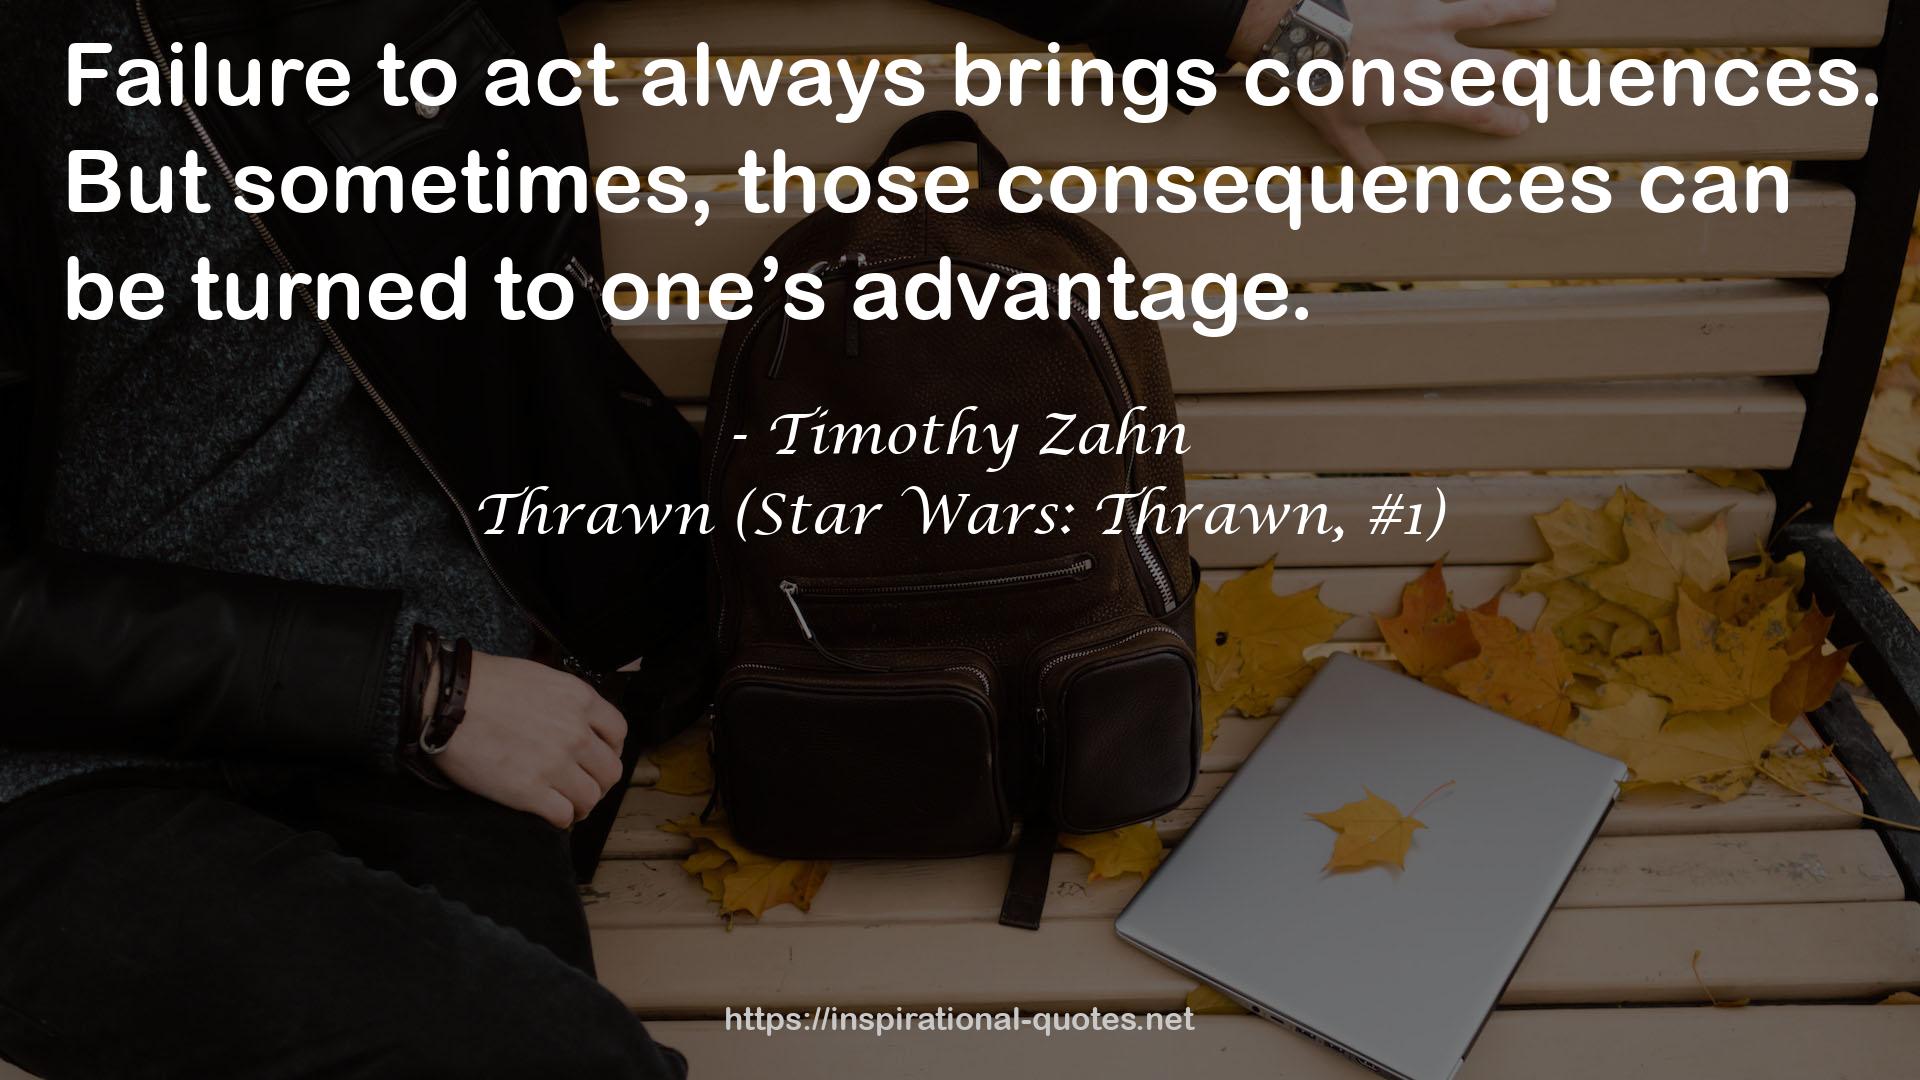 Timothy Zahn QUOTES